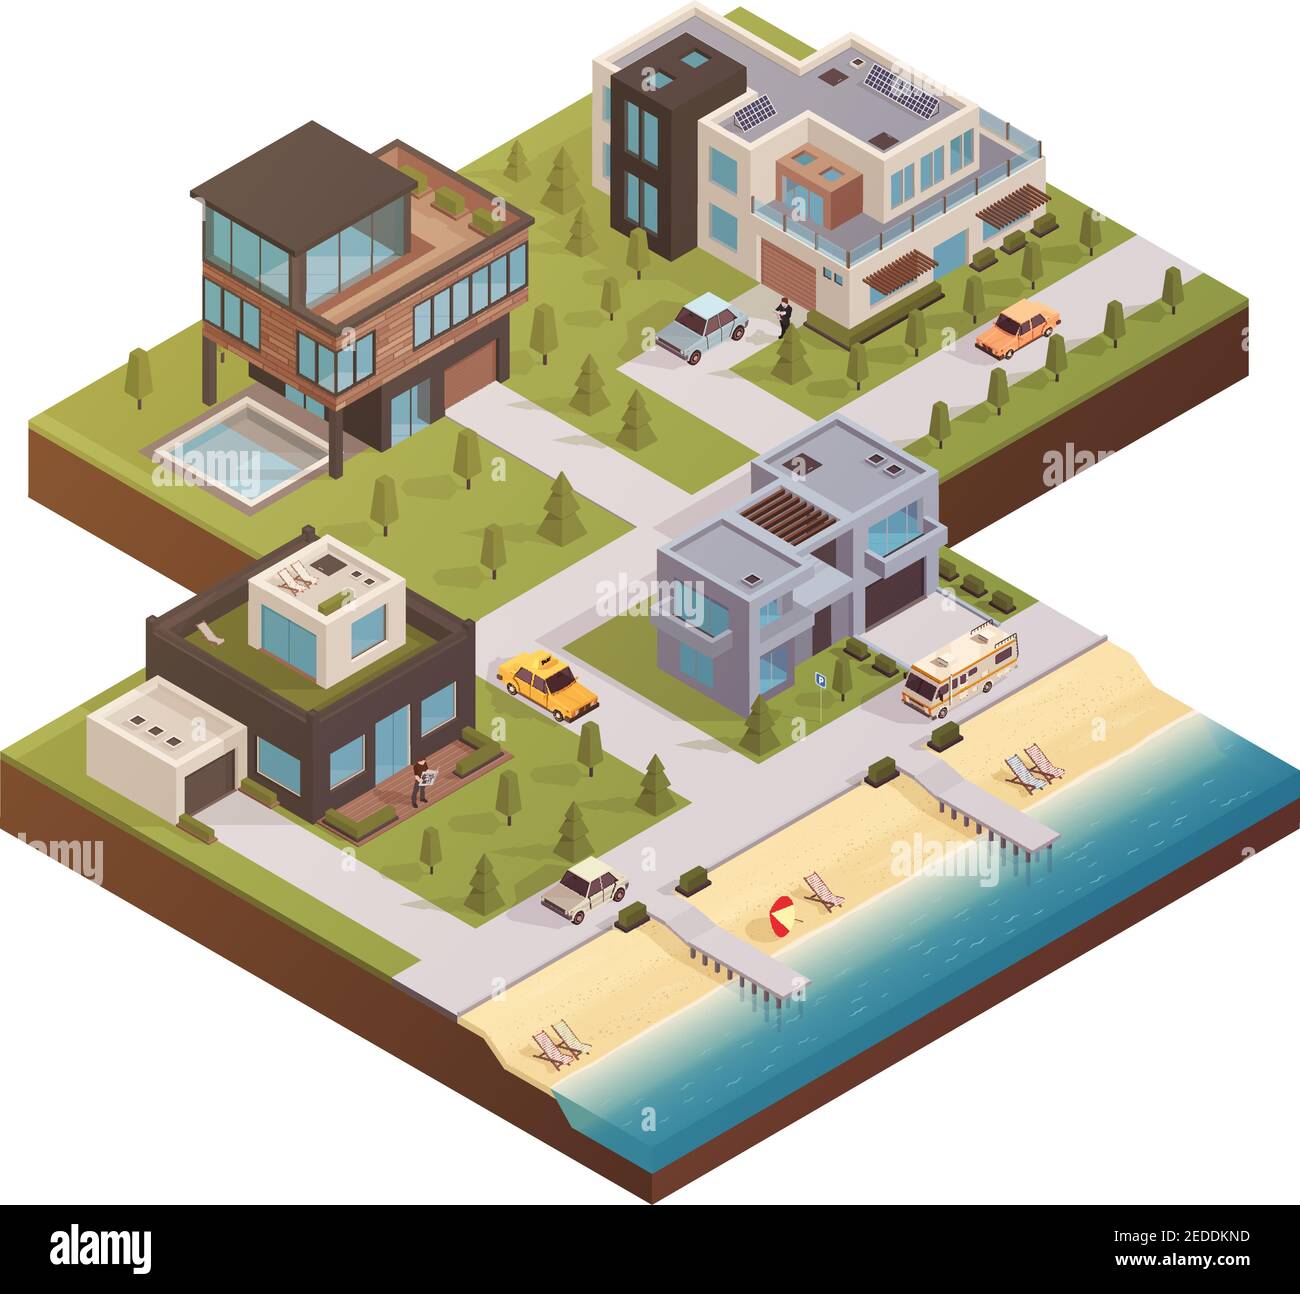 Isometric house concept with private residence neighborhood country estate buildings yards with trees cars and people vector illustration Stock Vector